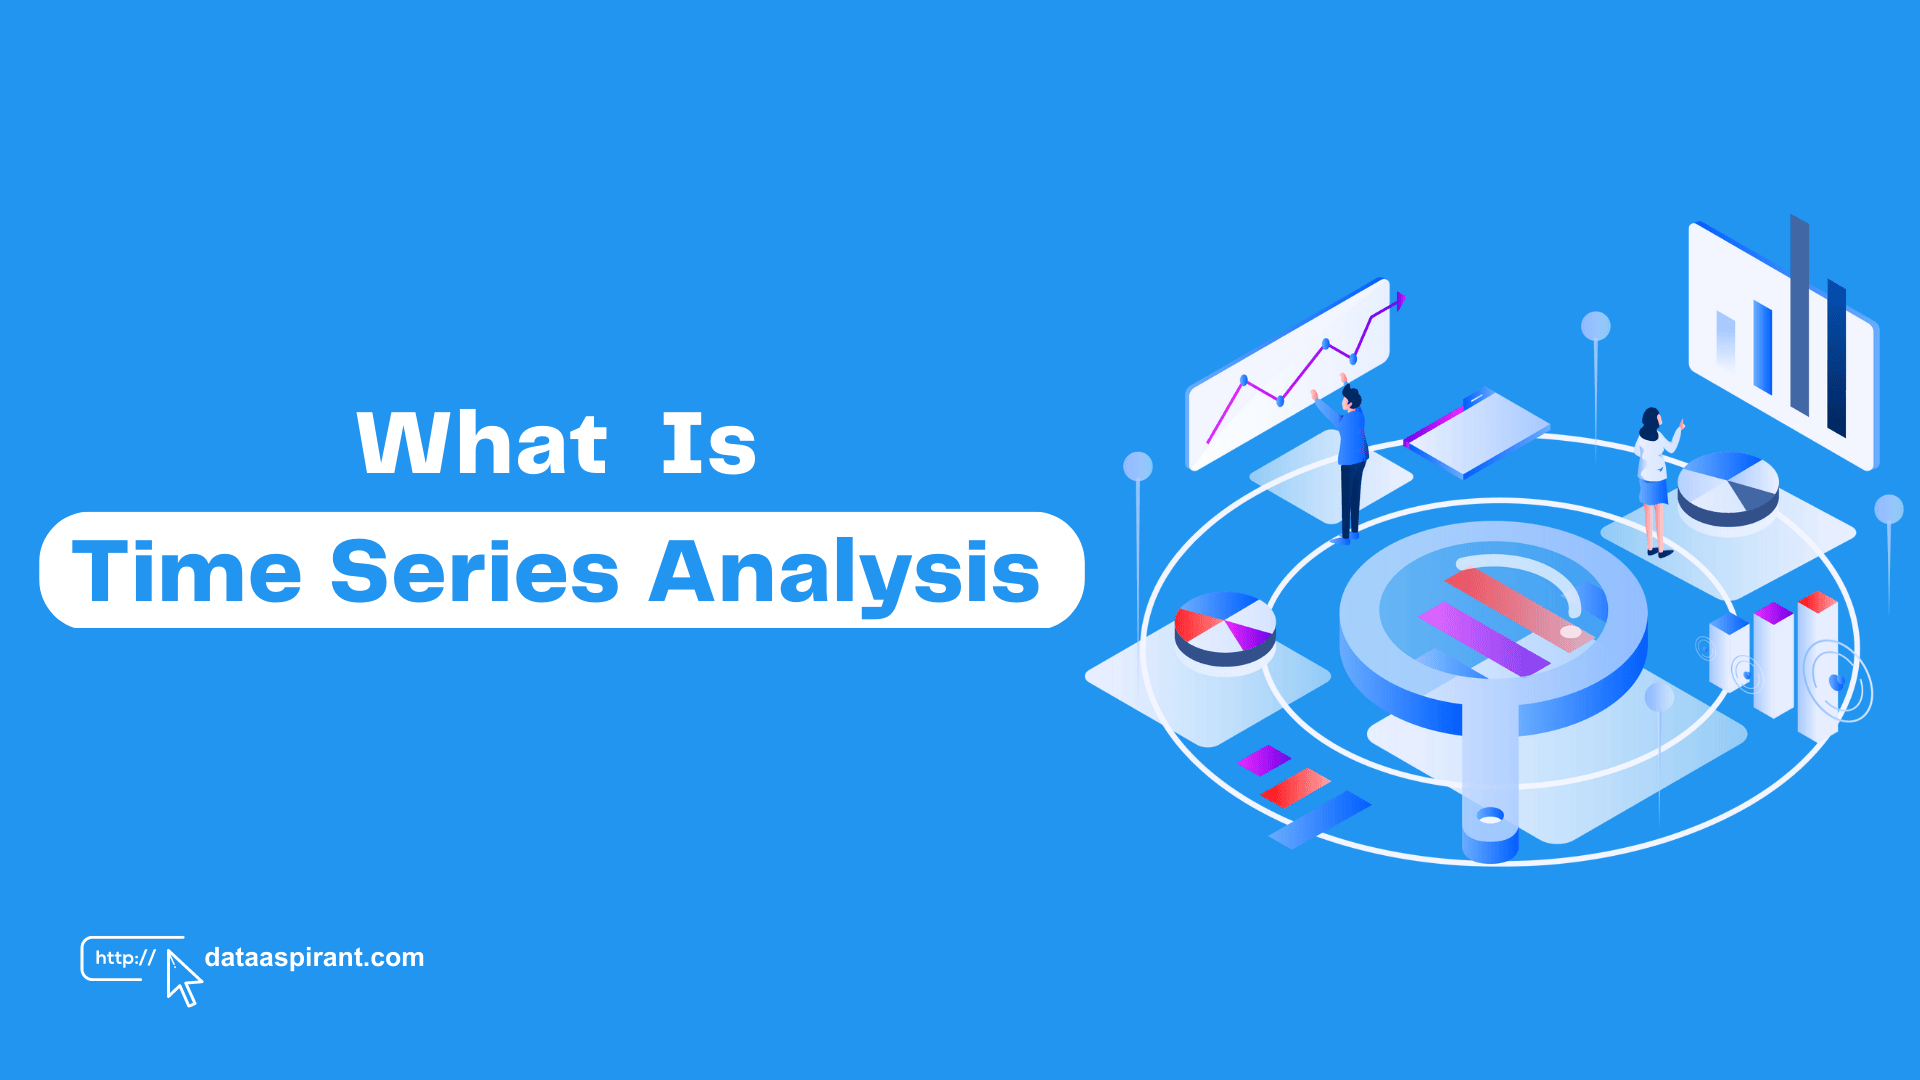 What is Time Series Analysis?